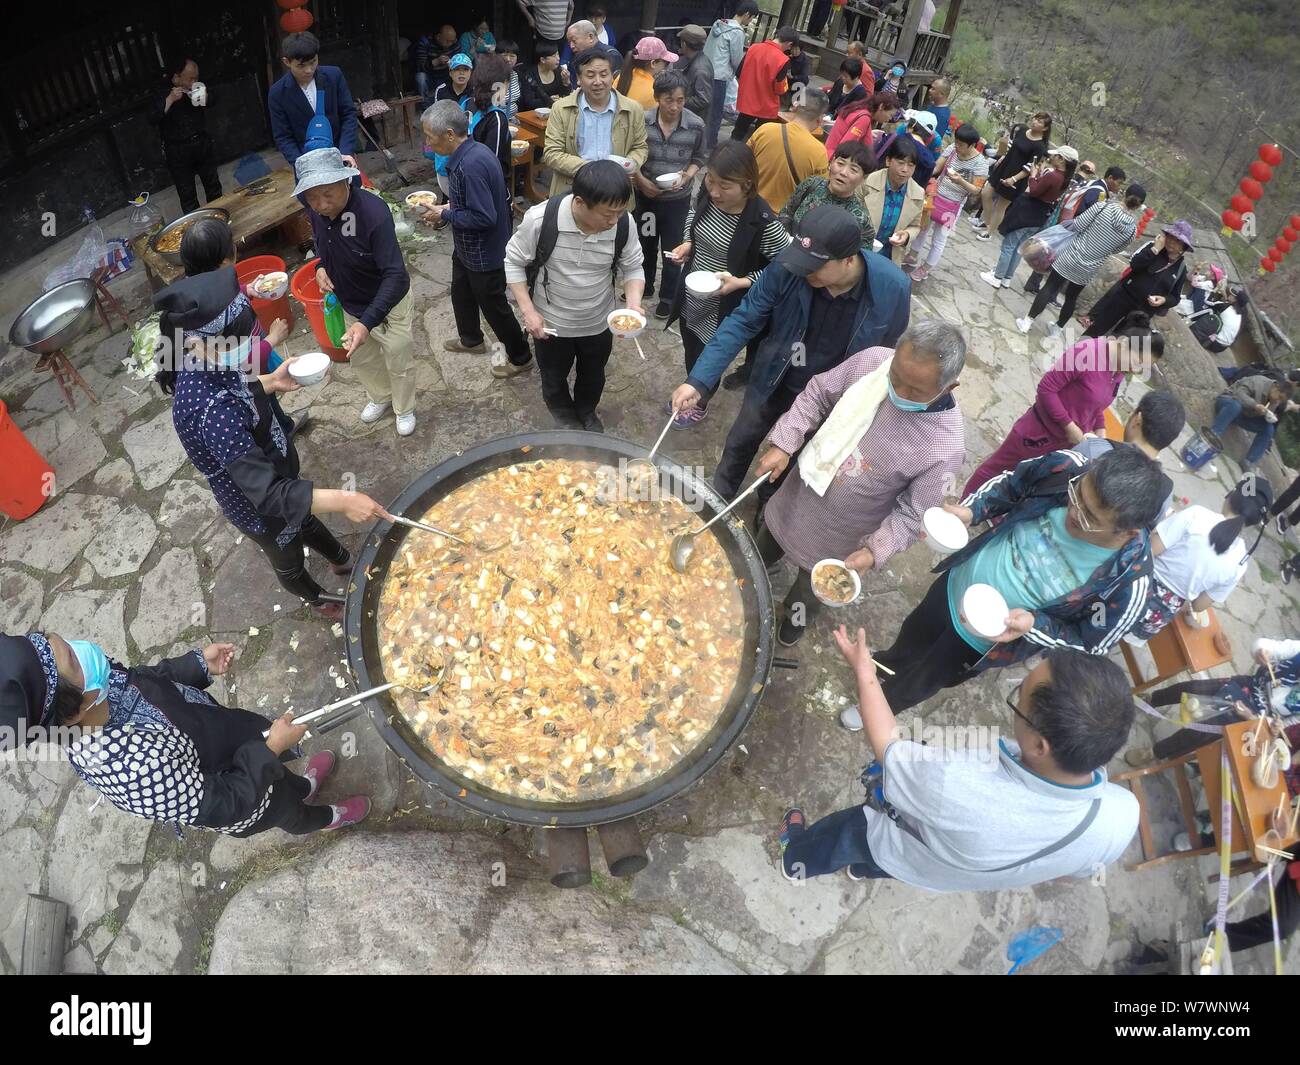 Chinese visitors crowd around a large pot to eat local cuisine during an event aiming to give visitors a taste of small town life in Yugong village, J Stock Photo